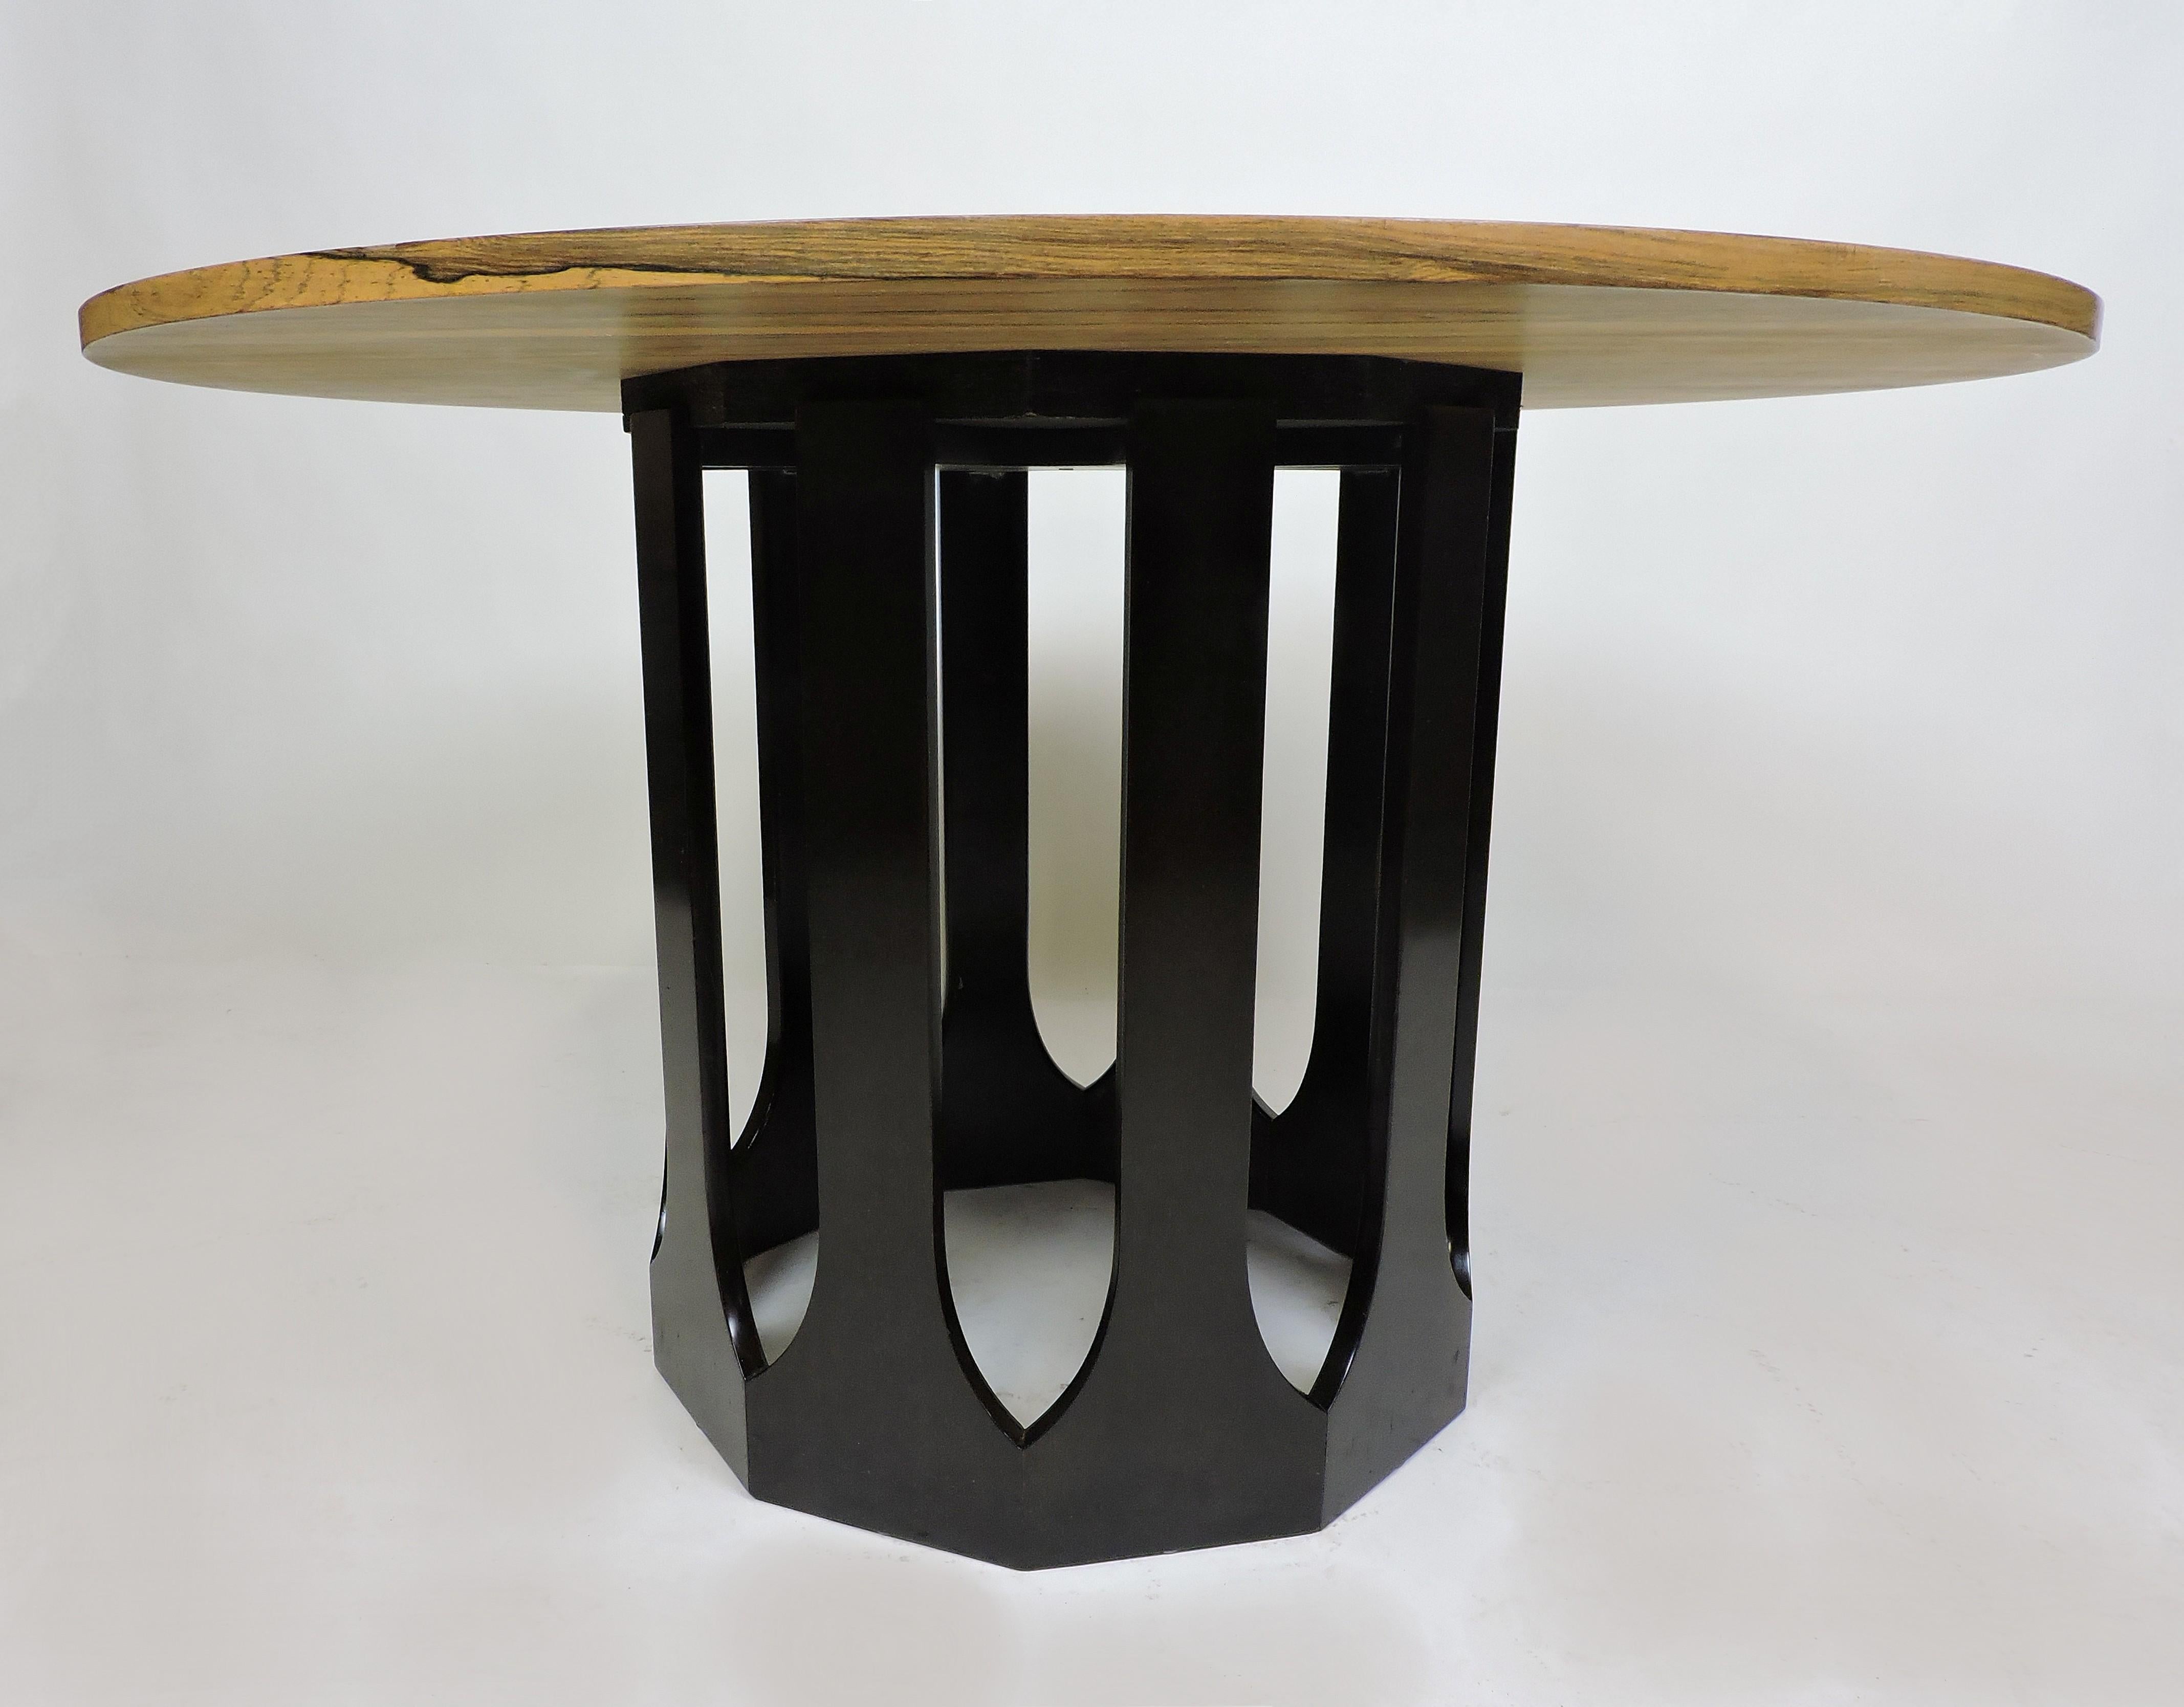 Elegant looking dining, breakfast, or game table designed by Harvey Probber. This table has a round top with a sculptural ebonized wood base. Can easily seat four.
  